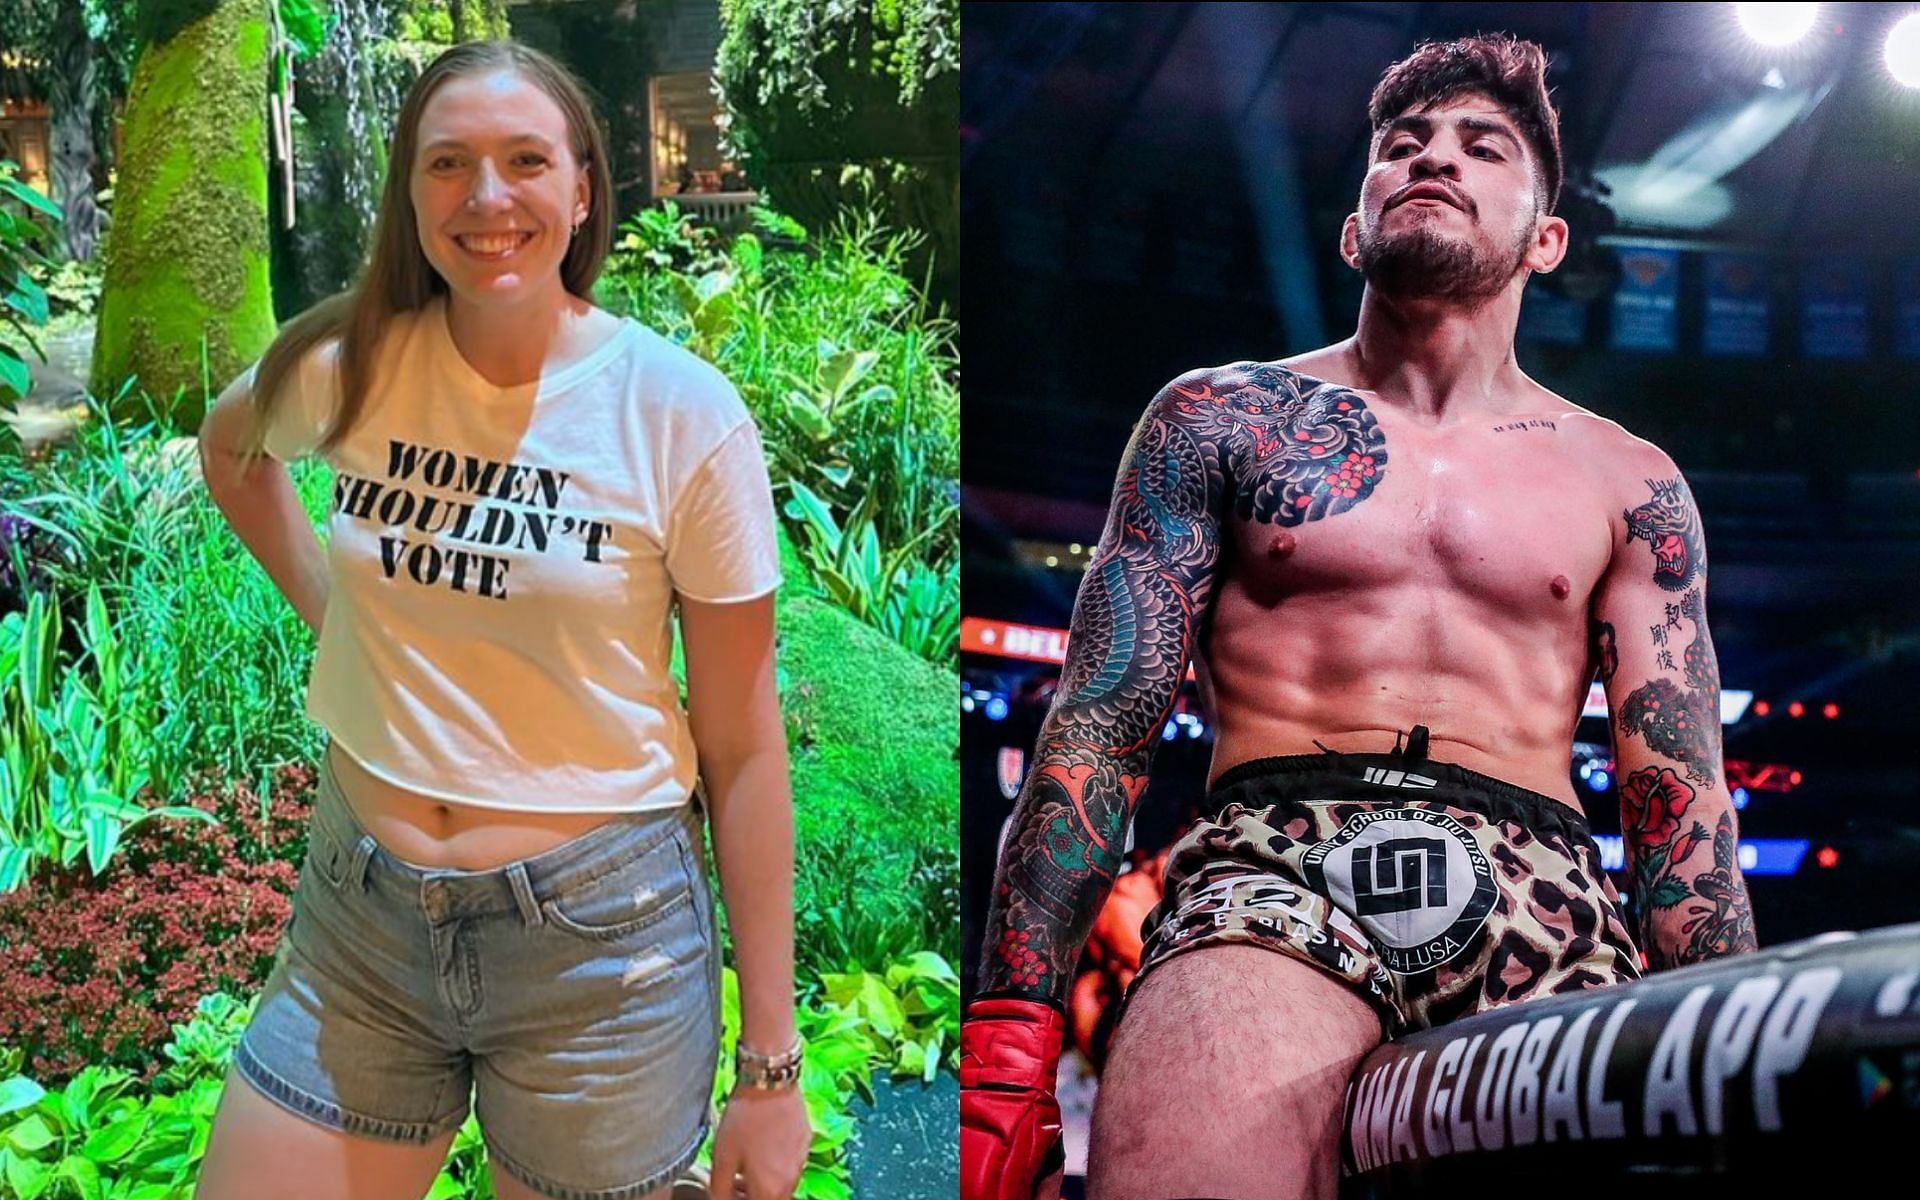 Pearl Davis and Dillon Danis [Image credits: @justpearlythingz and @dillondanis on Instagram] 